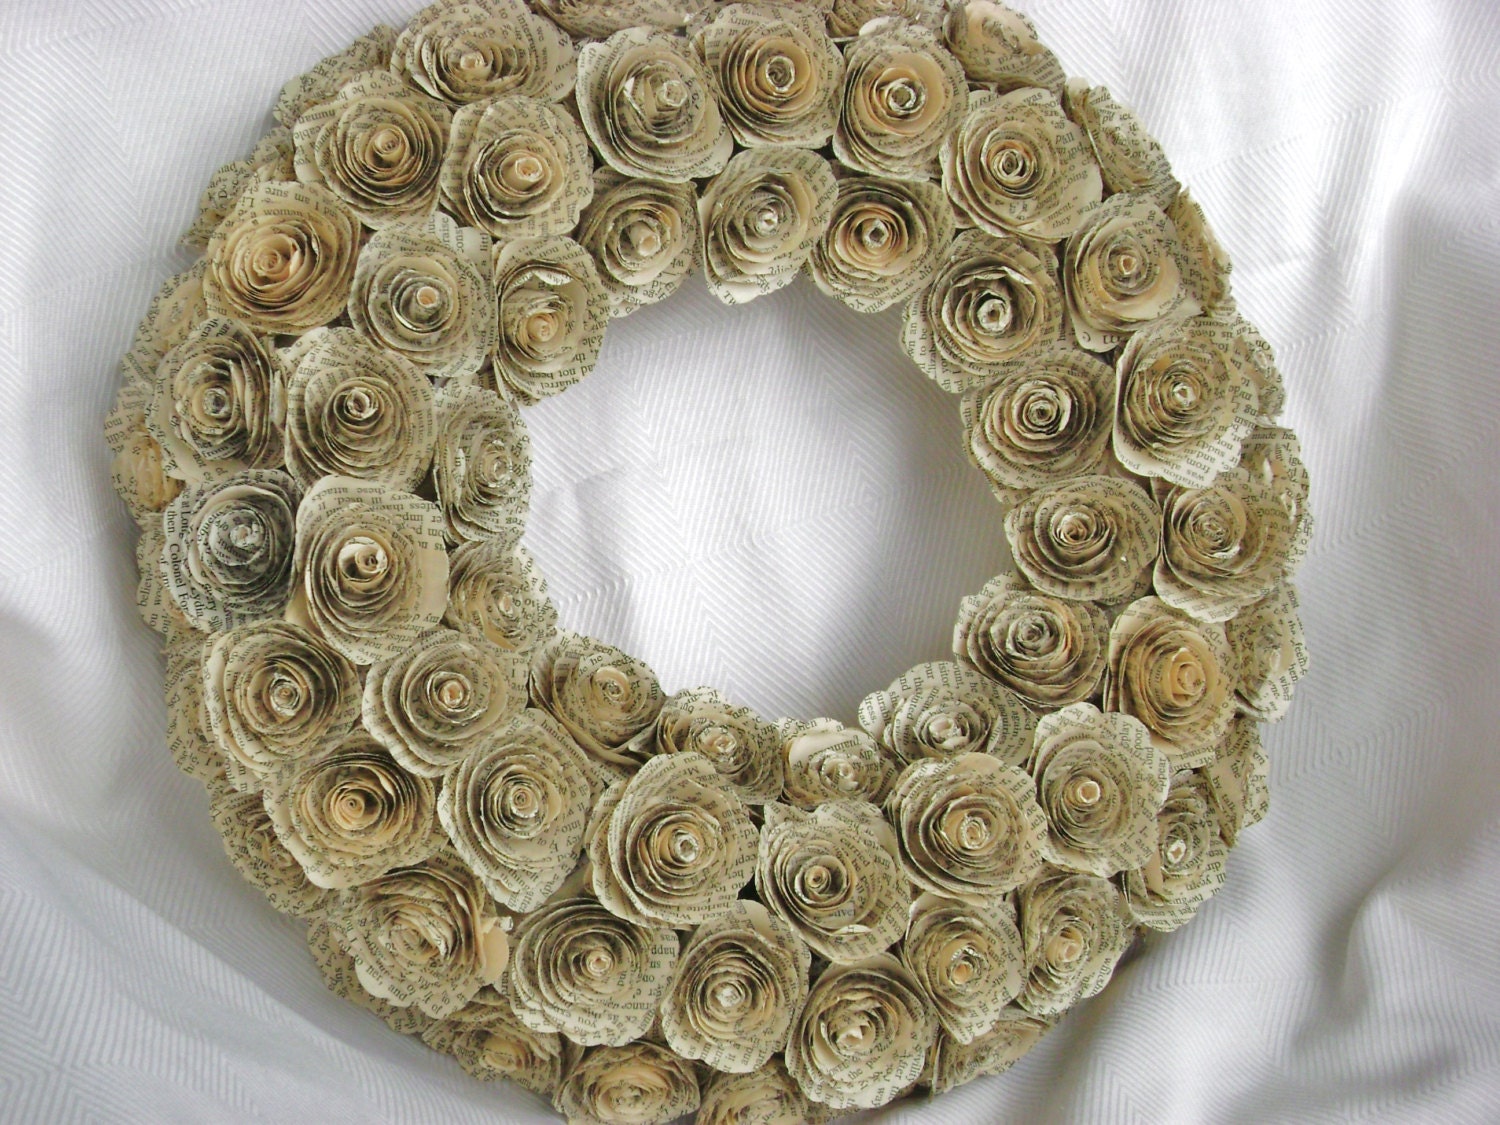 Lg Recycled Book Pages Rose~Paper Flower Picks For Wreaths